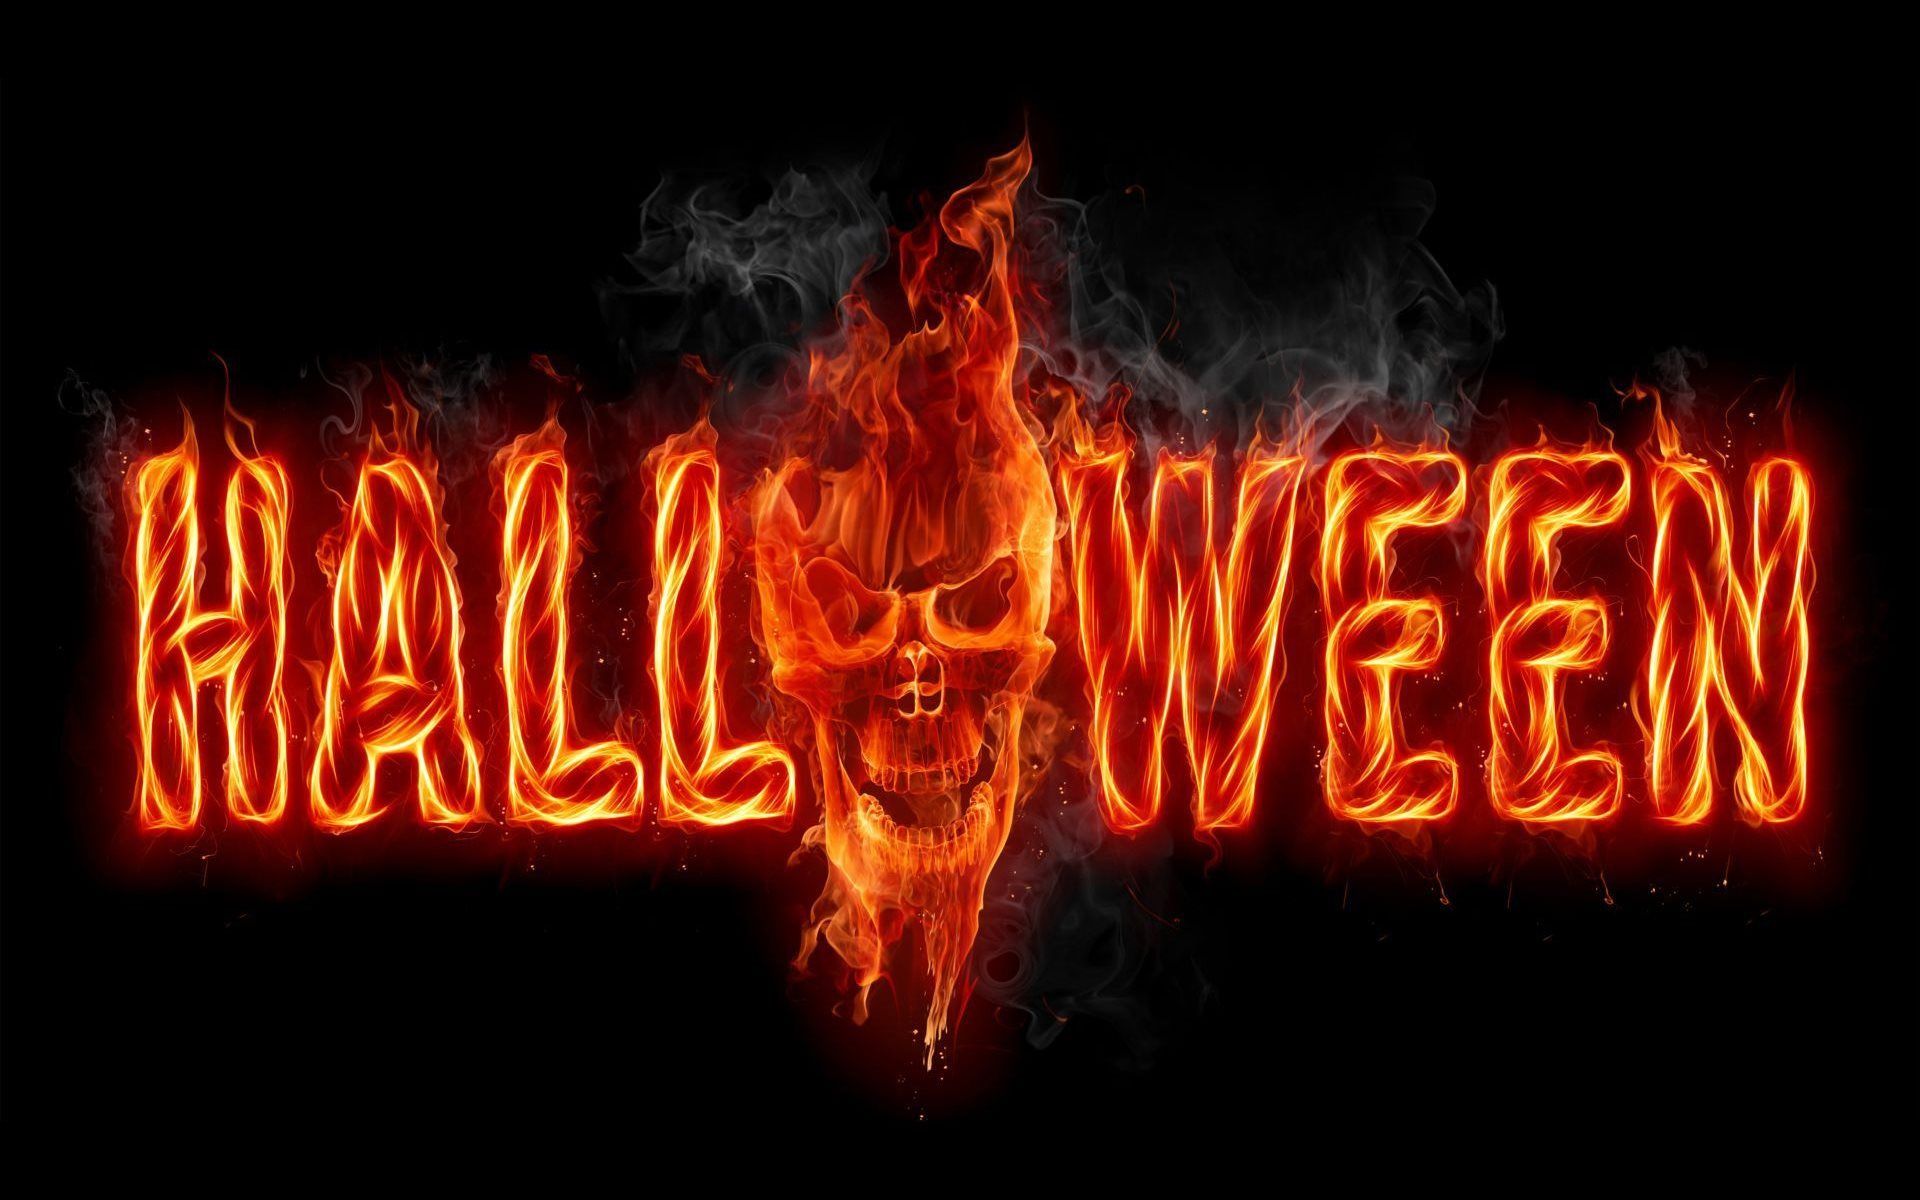 Download wallpaper Halloween, skull, flame, fire for desktop with resolution 1920x1200. High Quality HD picture wallpaper